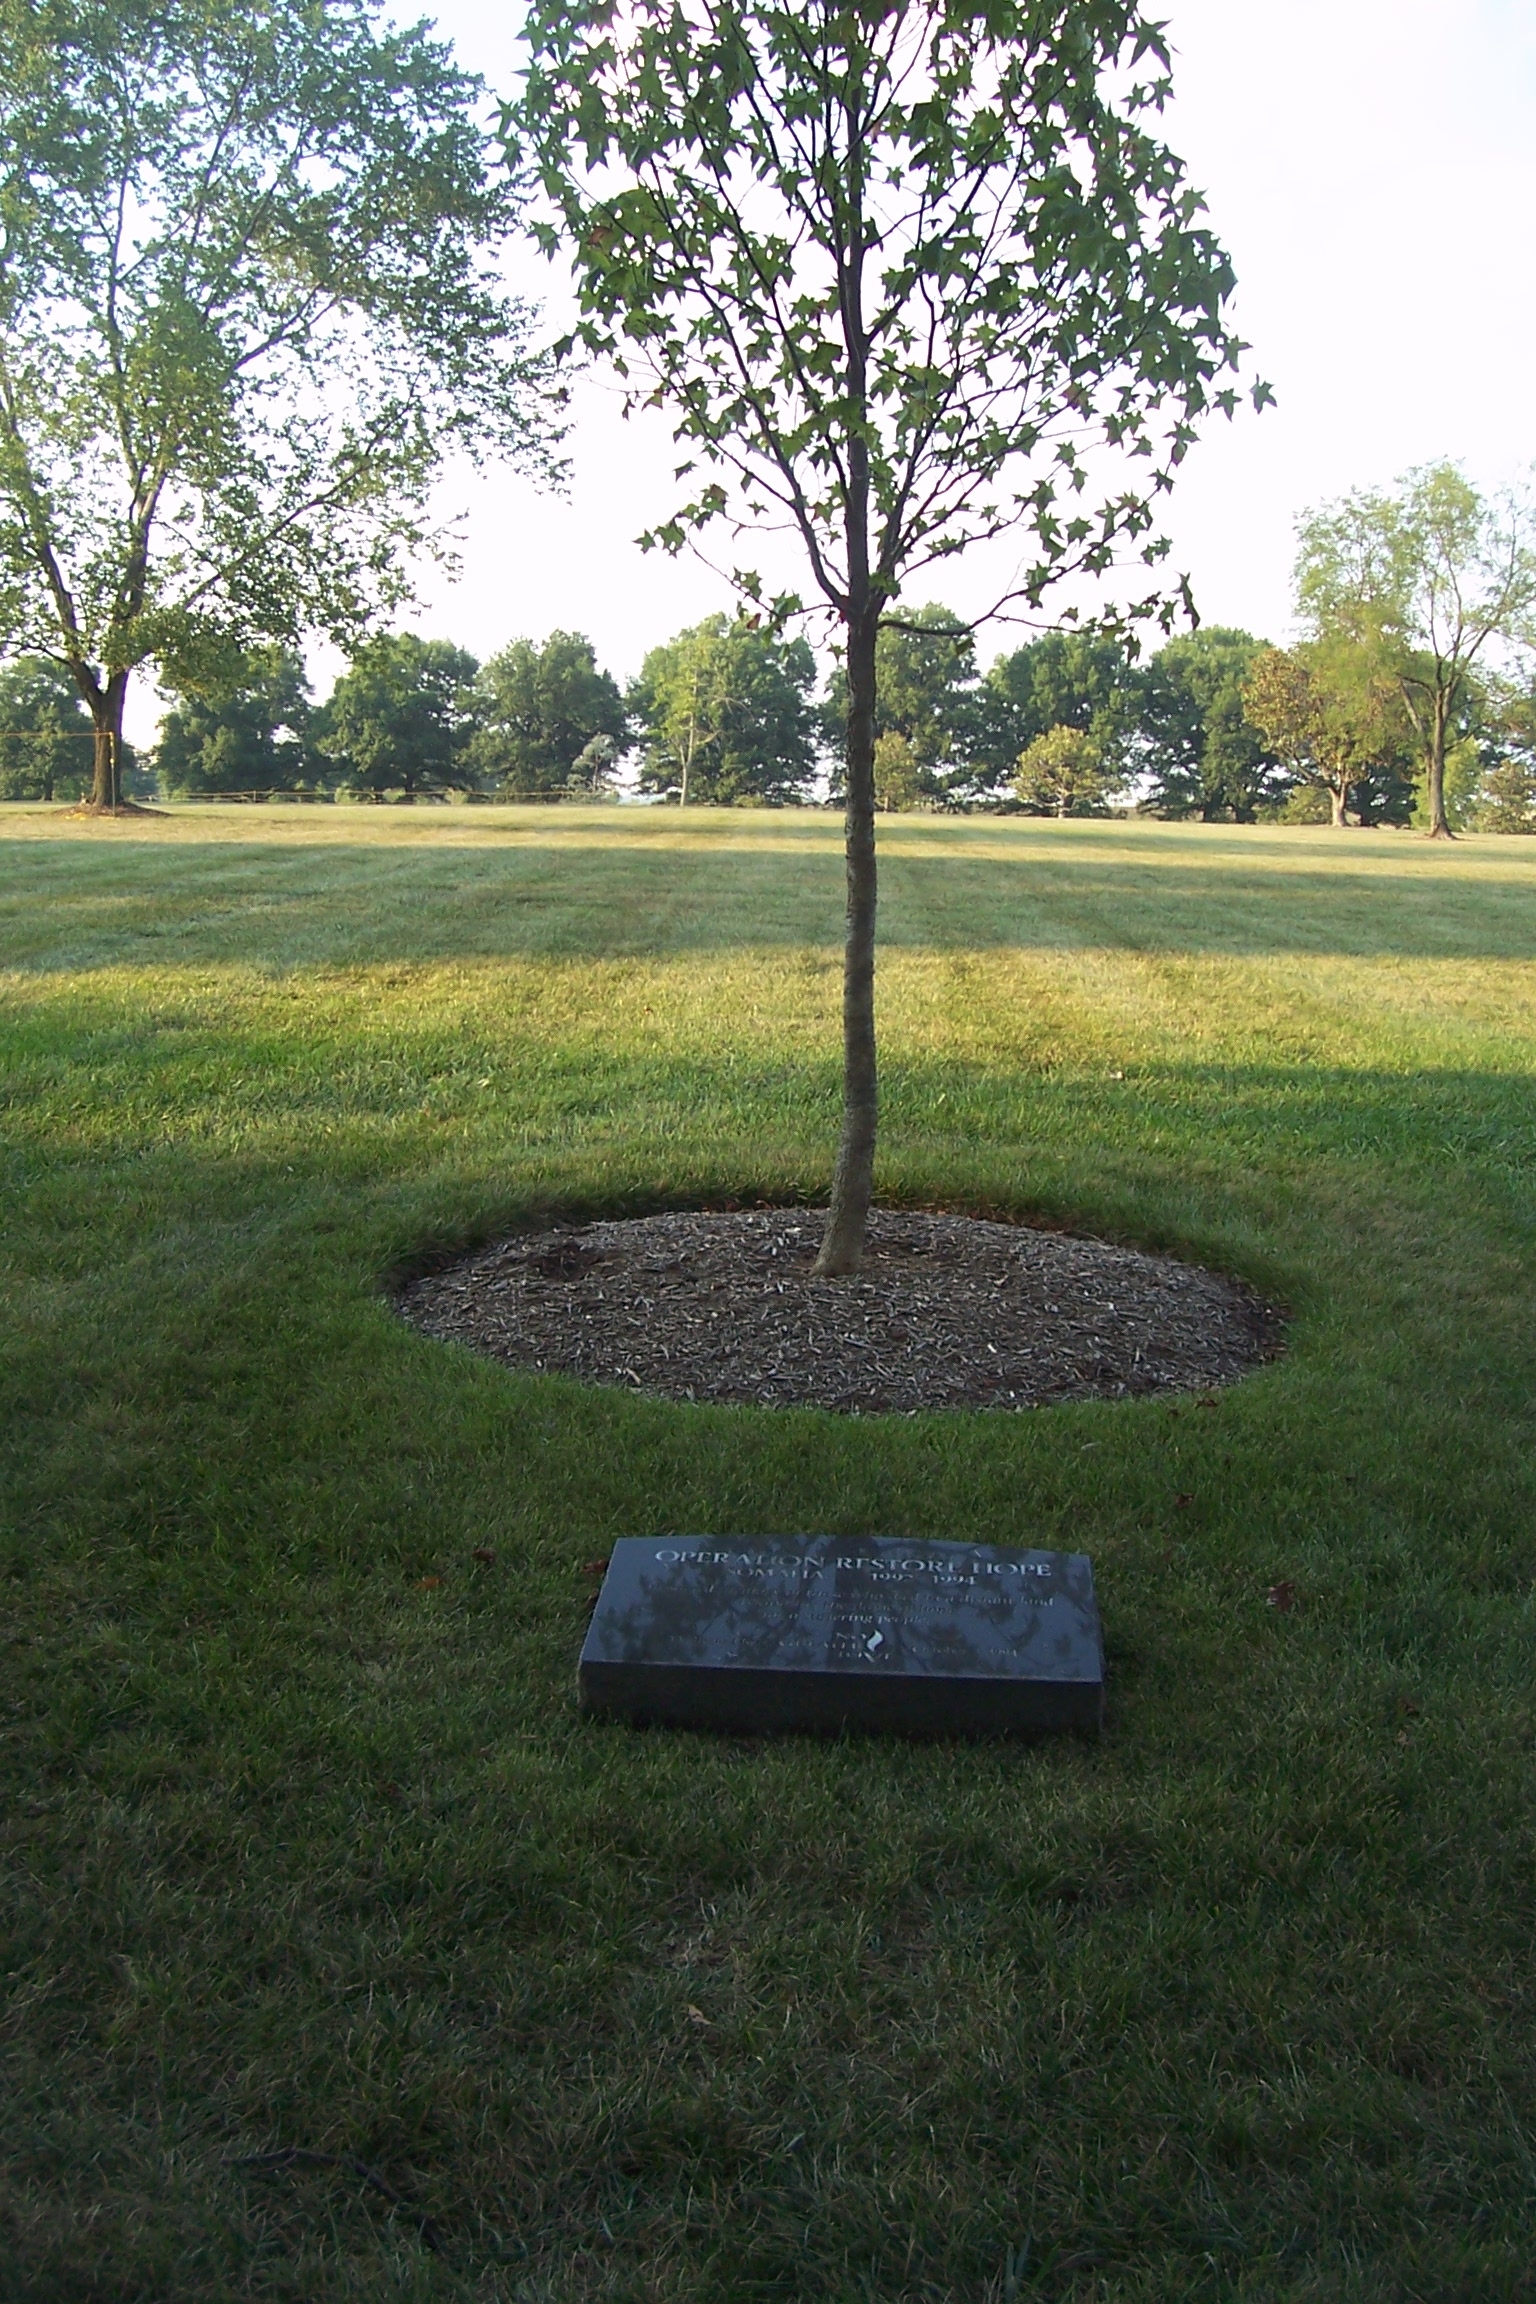 Operation Restore Hope Marker and memorial tree, ANC Section 60